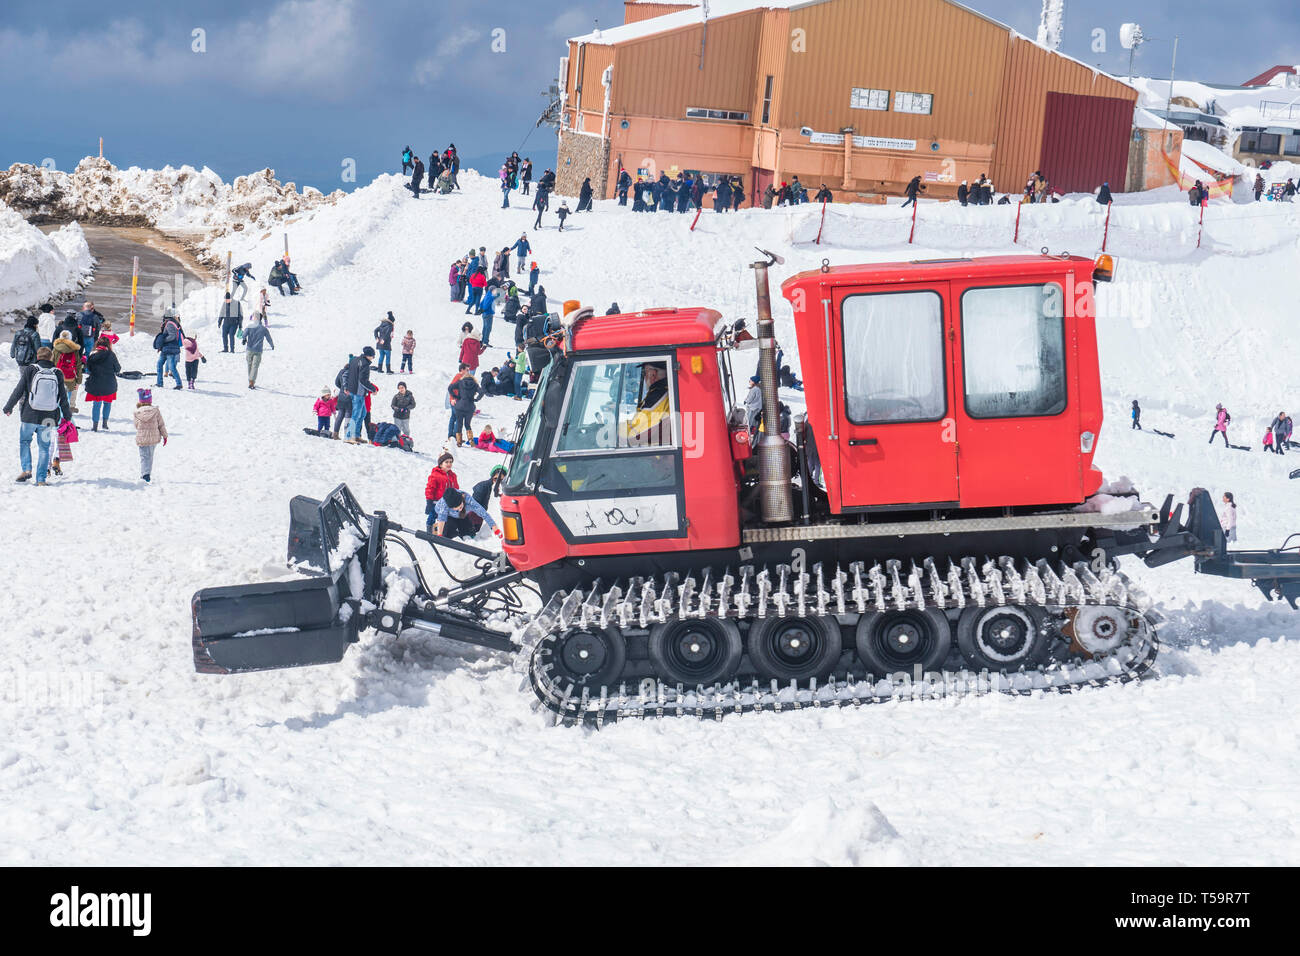 Hermon Mountain, Israel. A Snowcat vehicle clears snow near a Ski Cabin. Many visitors around. Stock Photo